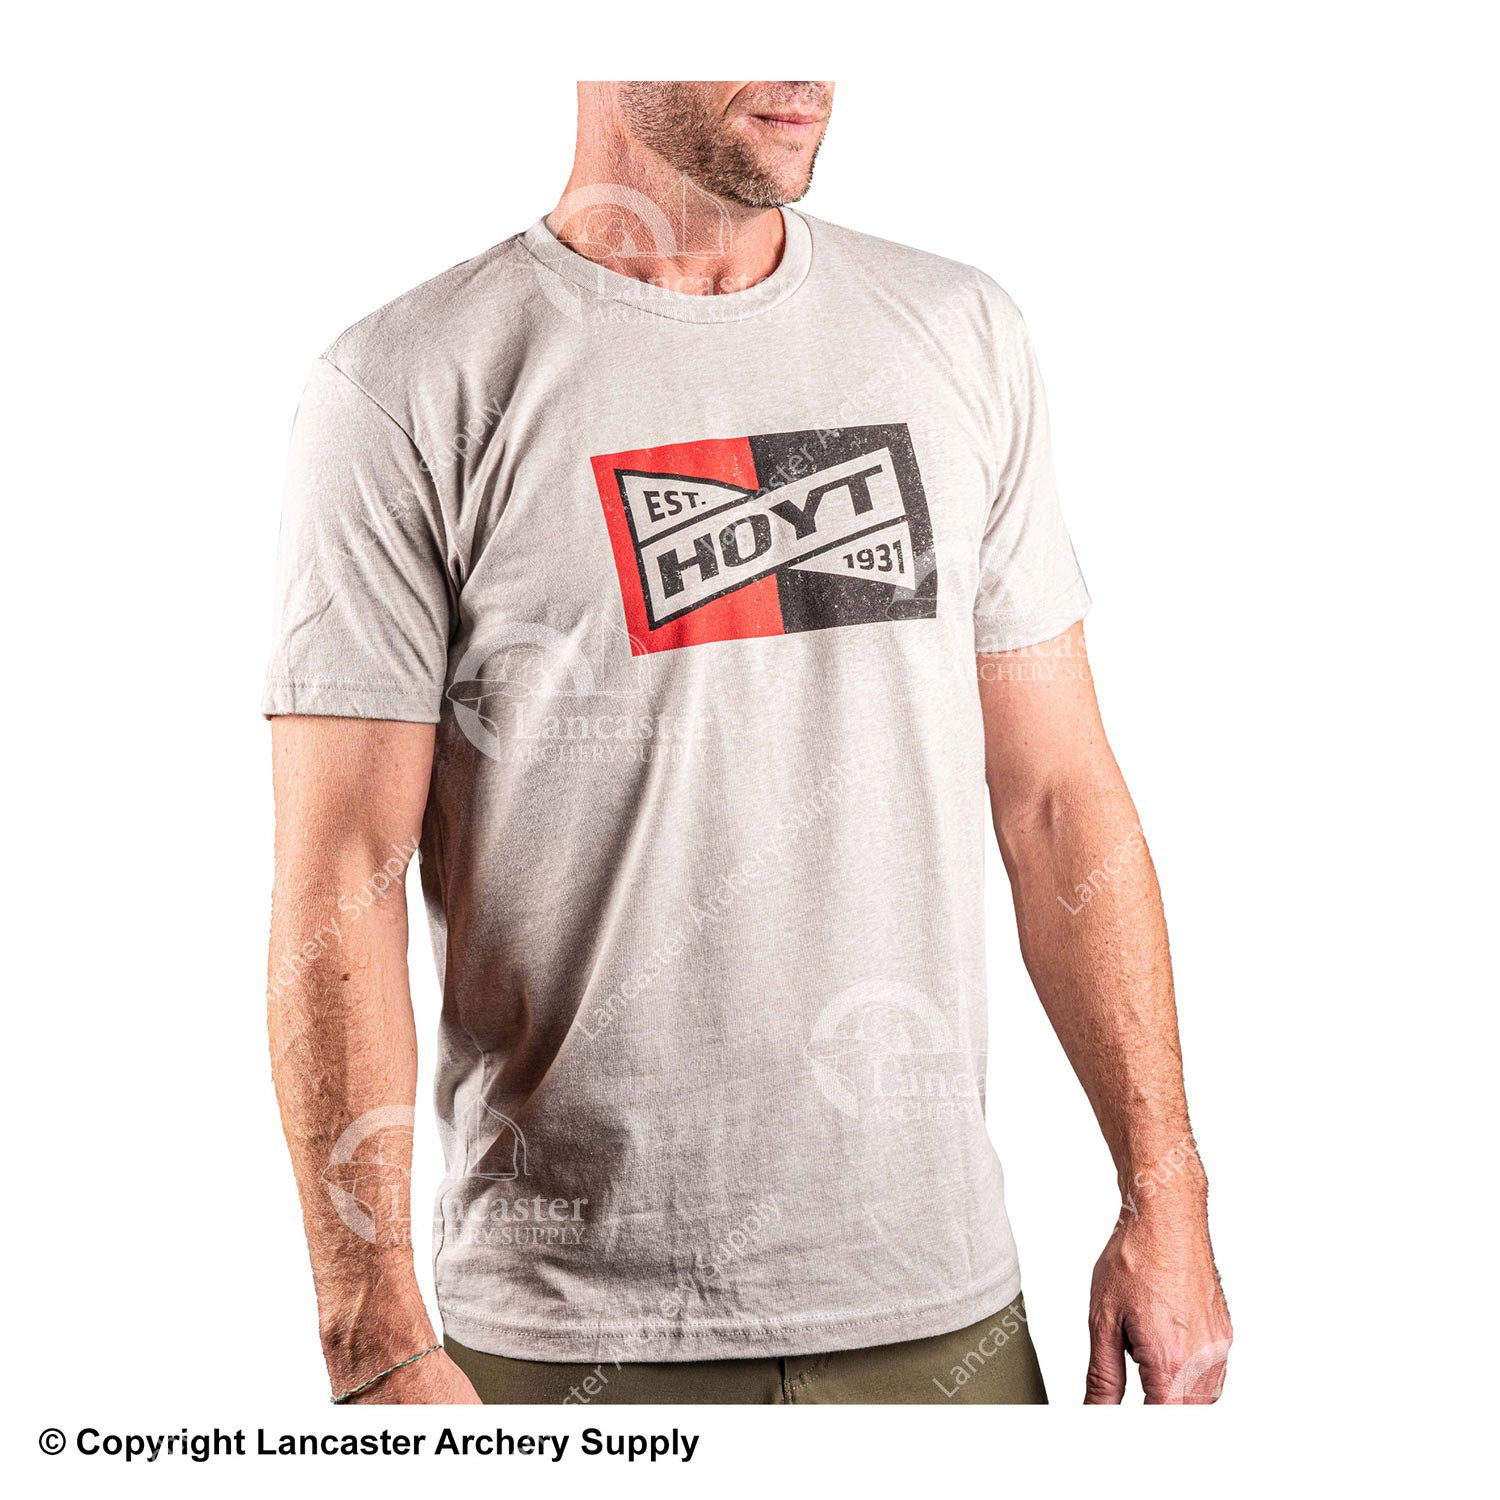 Hoyt Payload SS Tee